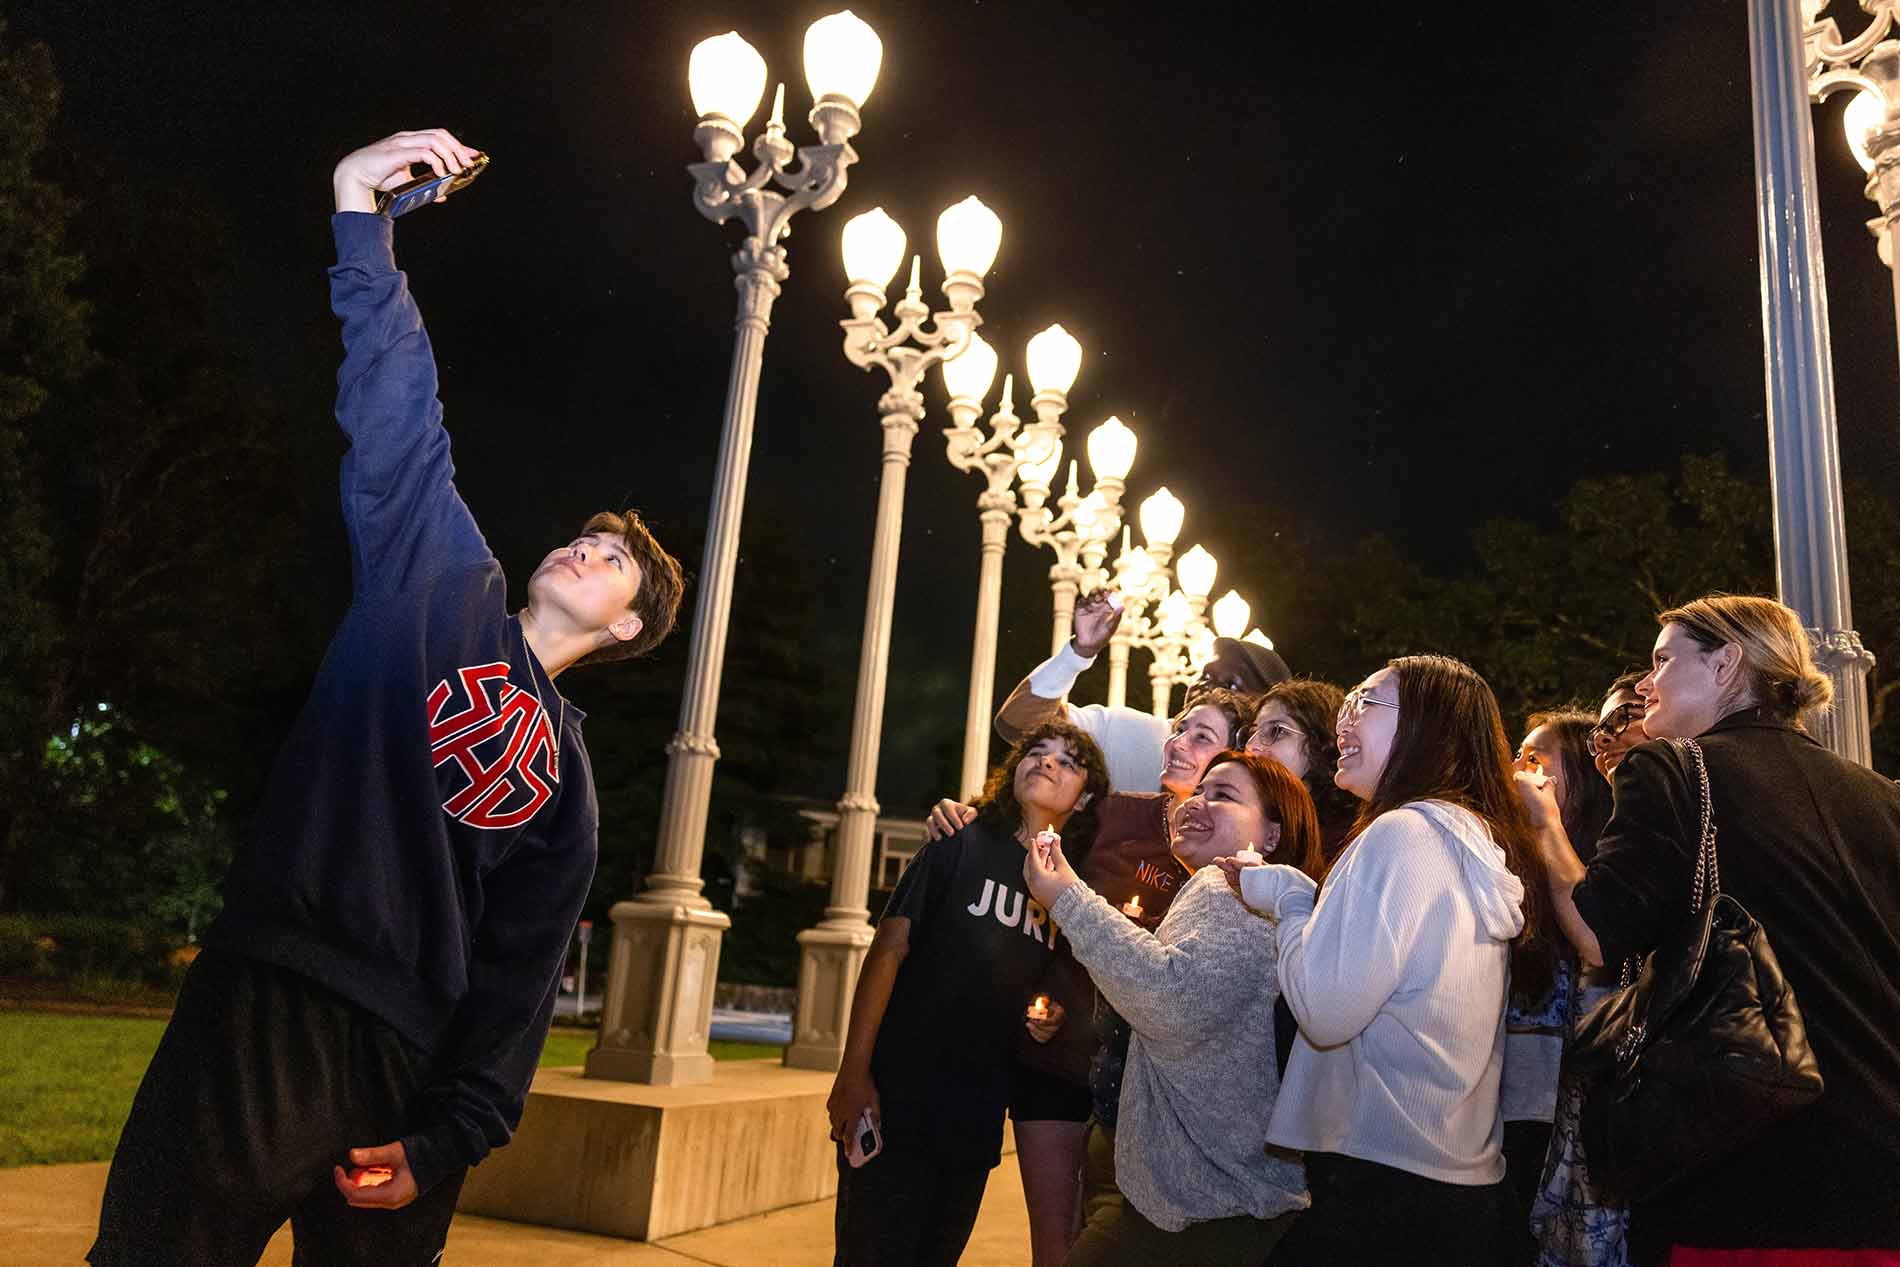 Students taking a selfie outside with the Light of Reason